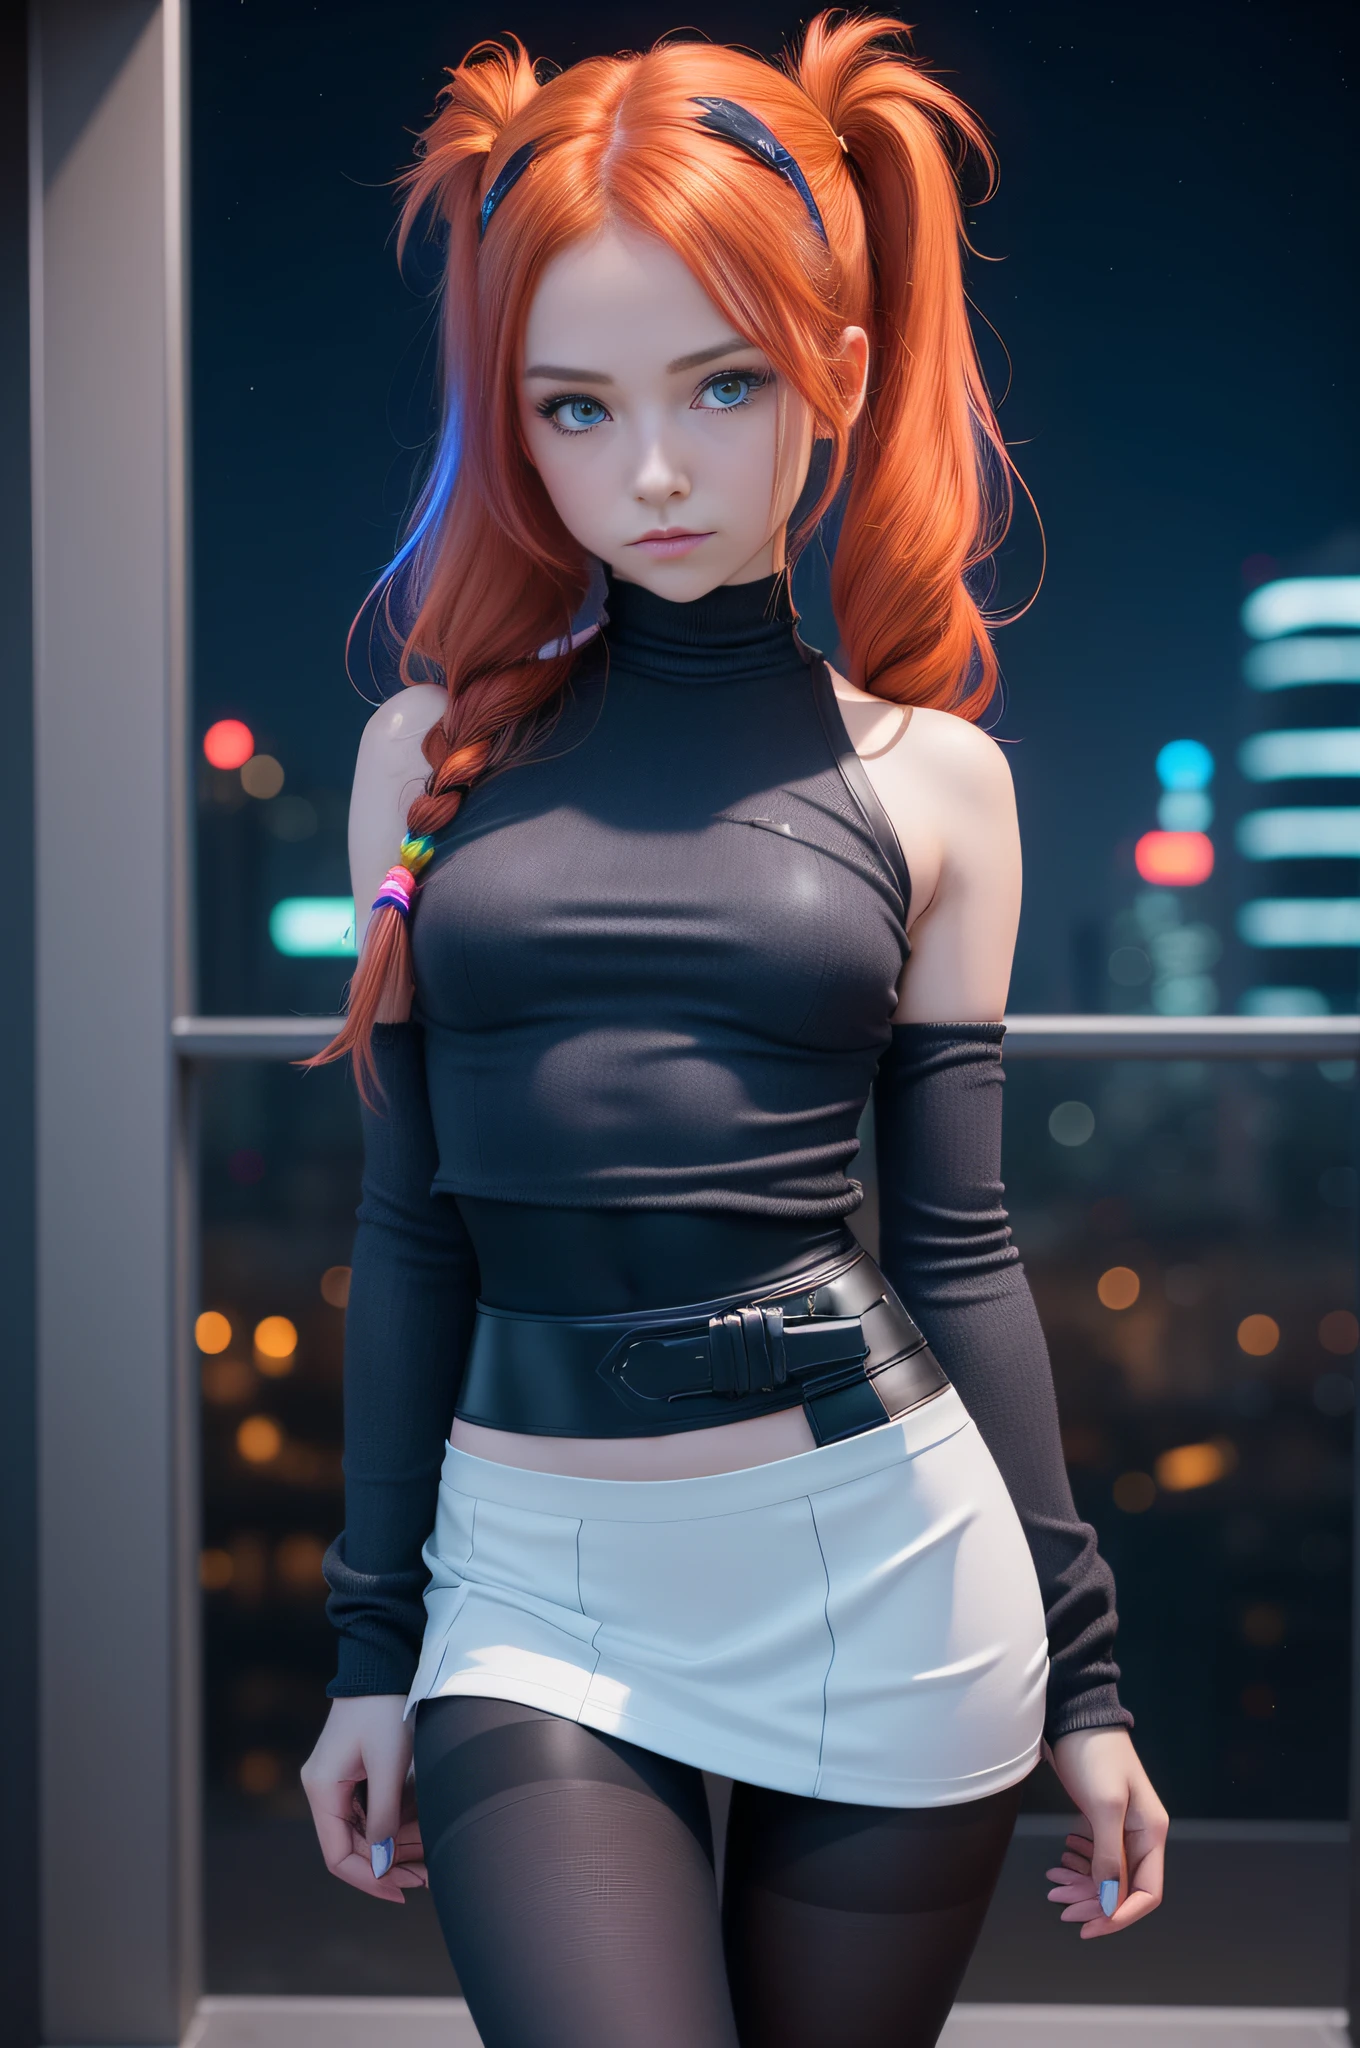 1 girl, solo, (nsfw), cute redhead 18-year-old girl in twin tails, ((perfect female body)), (cute face make up), multiple (rainbow colored hair: 1.2), (beautiful detailed blue eyes: 1.6), (photo realistic eyes: 1.6), happy, Ukrainian, (petite body), ((small hips)), pale white skin, (mini skirt and tube top), (matte pantyhose: 1.6), ("tron legacy" style background}, (night time), photo realistic.